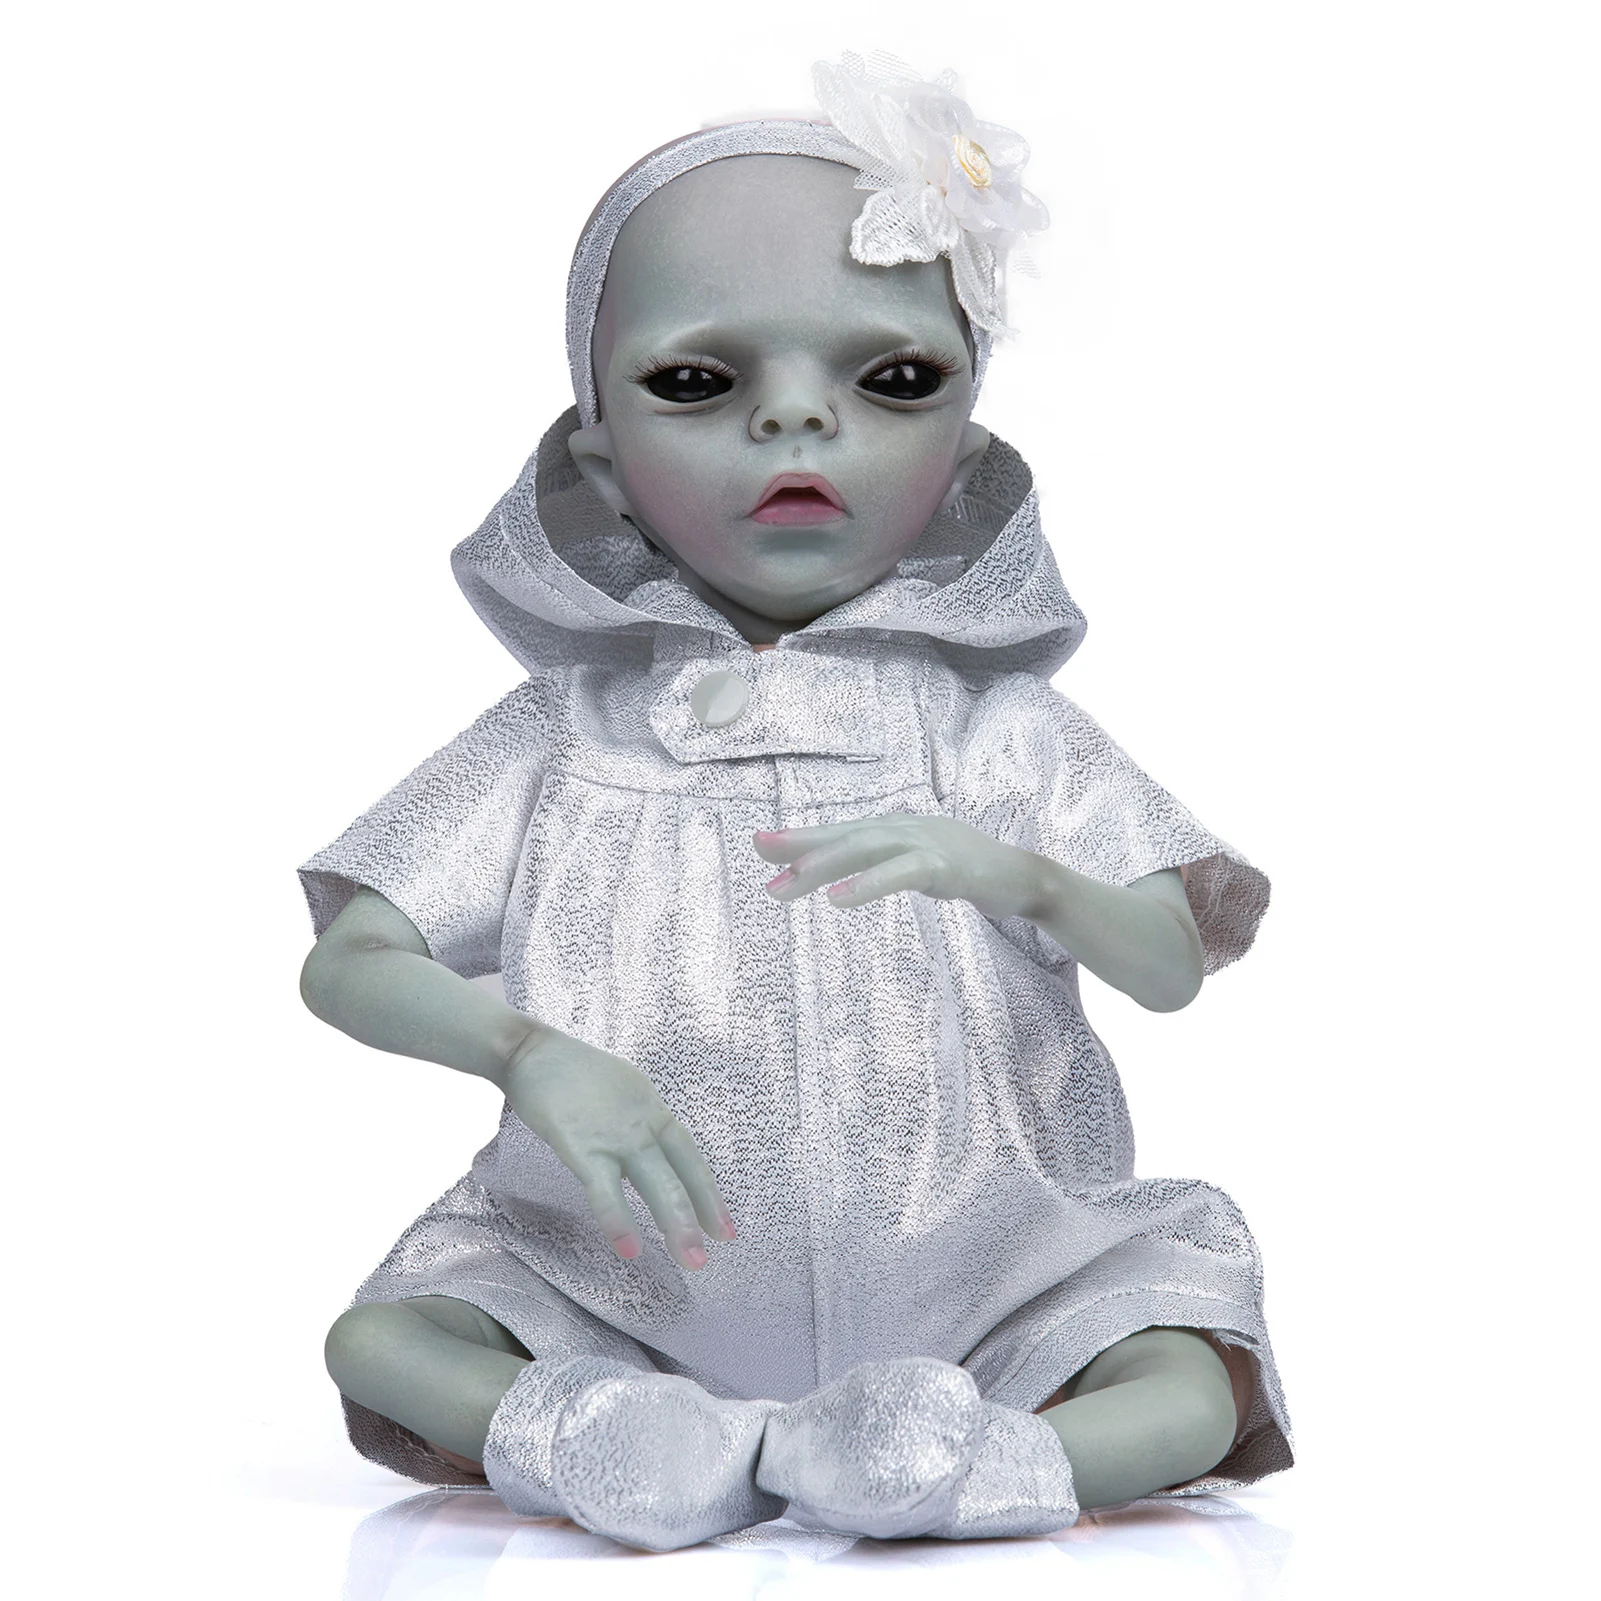 

Collectable Reborn Baby Realistic Alien Doll Full Body Silicone Vinyl Dolls Ultra-Realistic Baby Doll Poseable Baby Dolls Toy 14